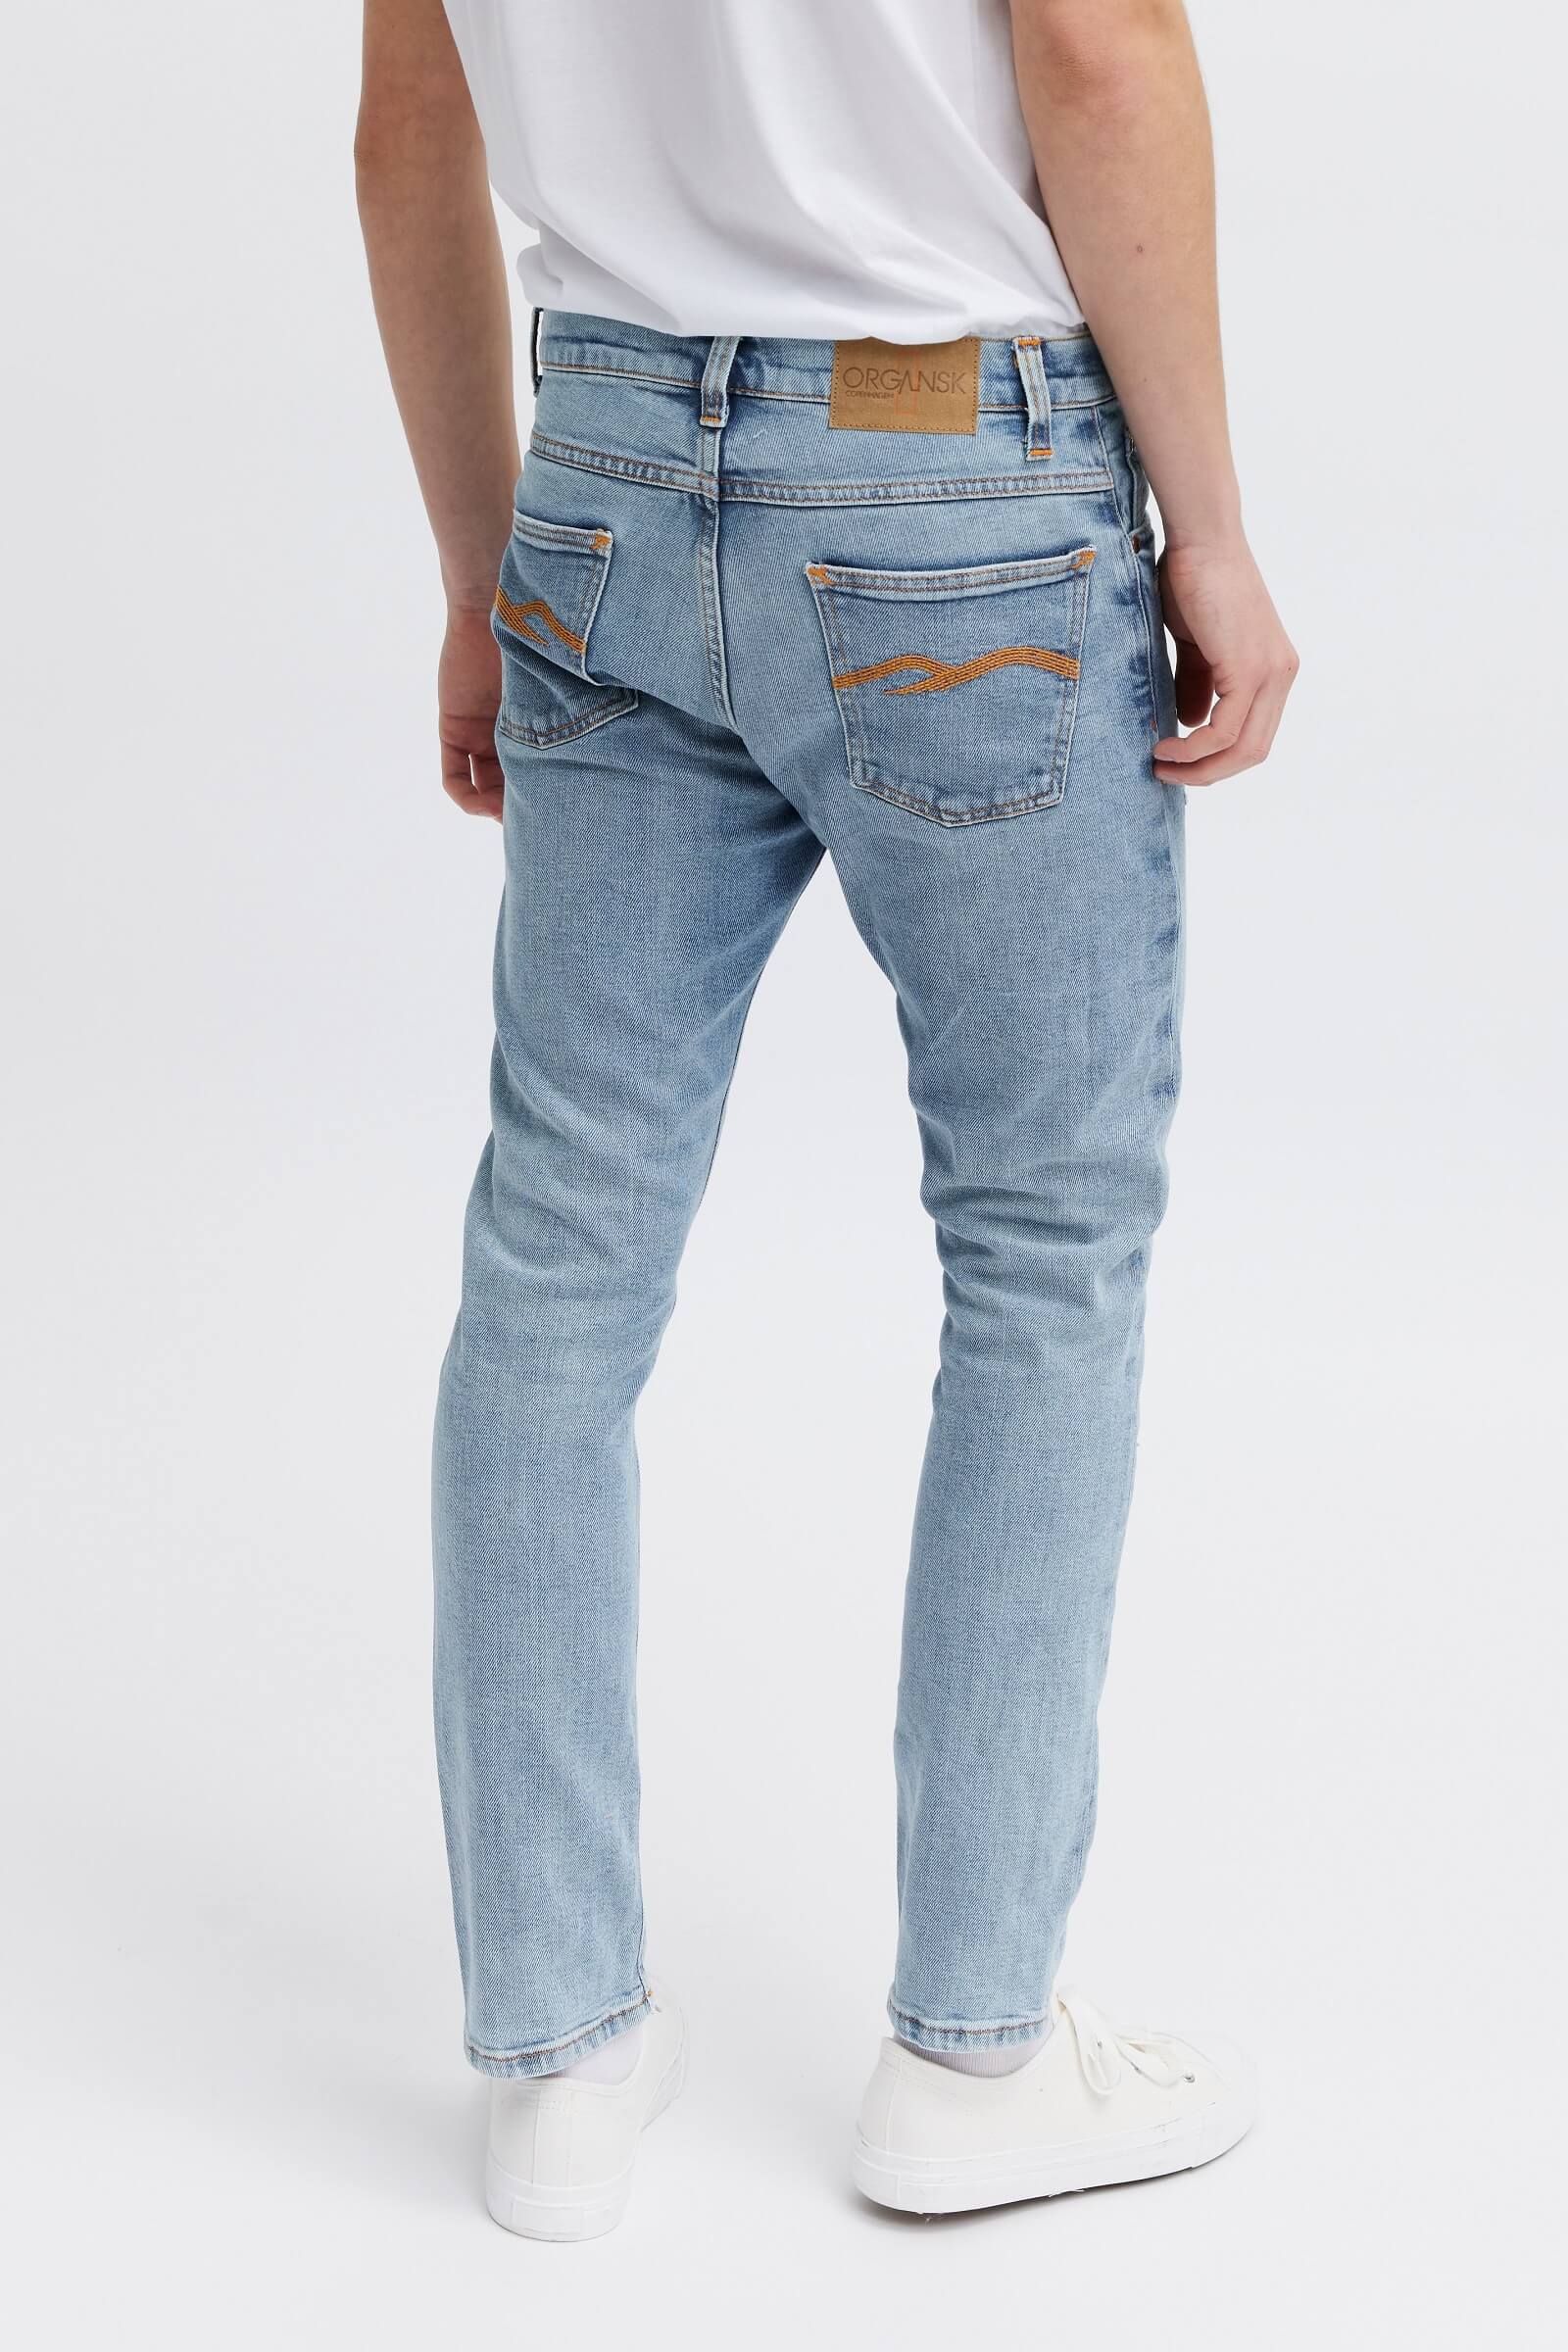 Blue and stylish organic jeans for men